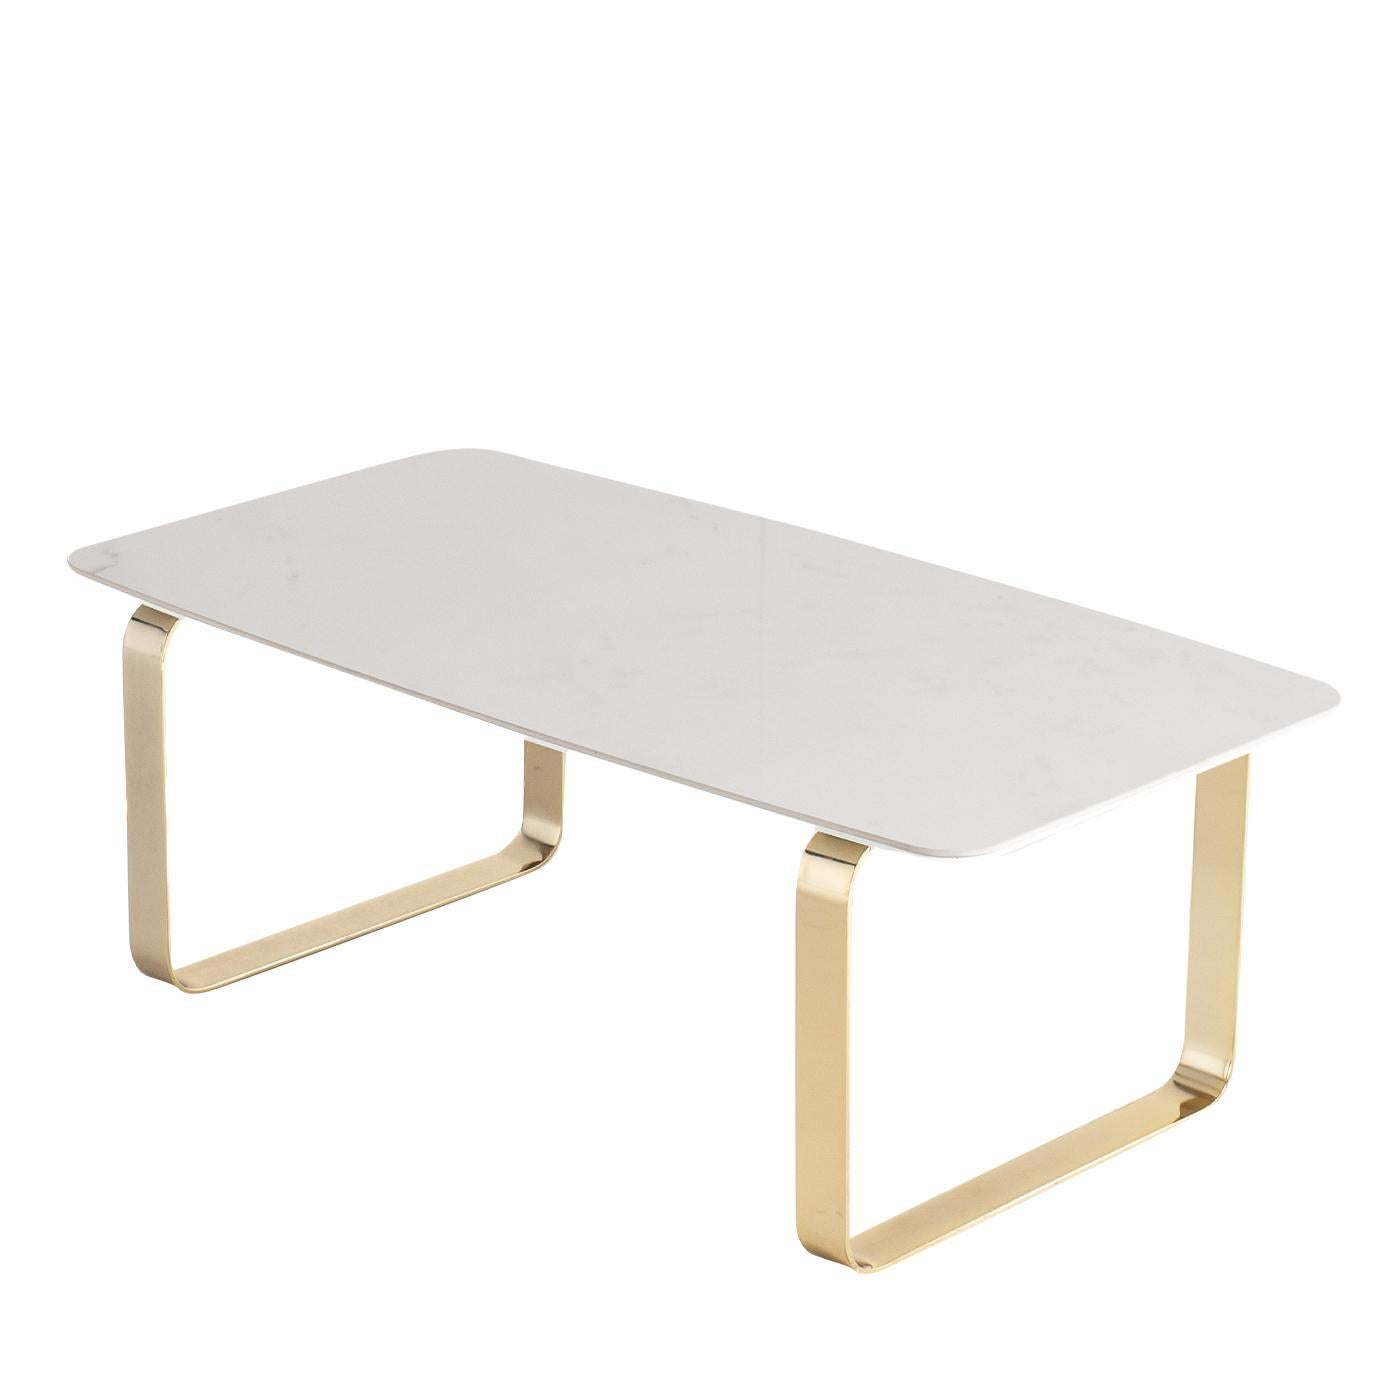 Seemingly simple, the plus coffee table is the perfect mix of clean lines and gentle curves, making it a truly stand out piece in any contemporary living space. Shown here with a lacquered wooden top and a glossy gold base, the table can per